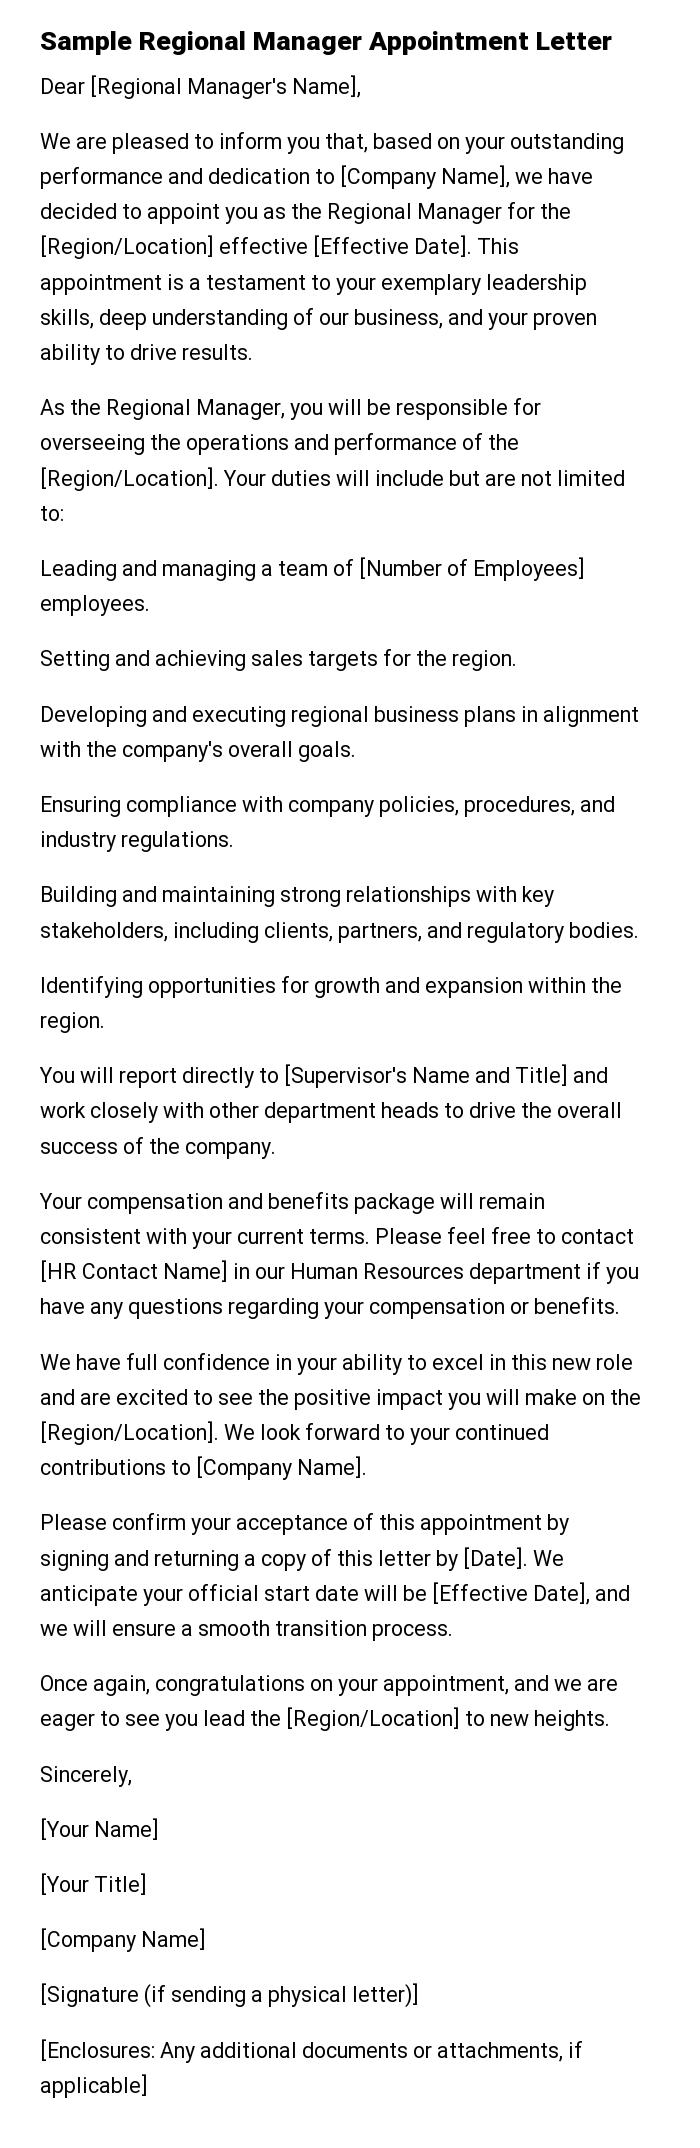 Sample Regional Manager Appointment Letter